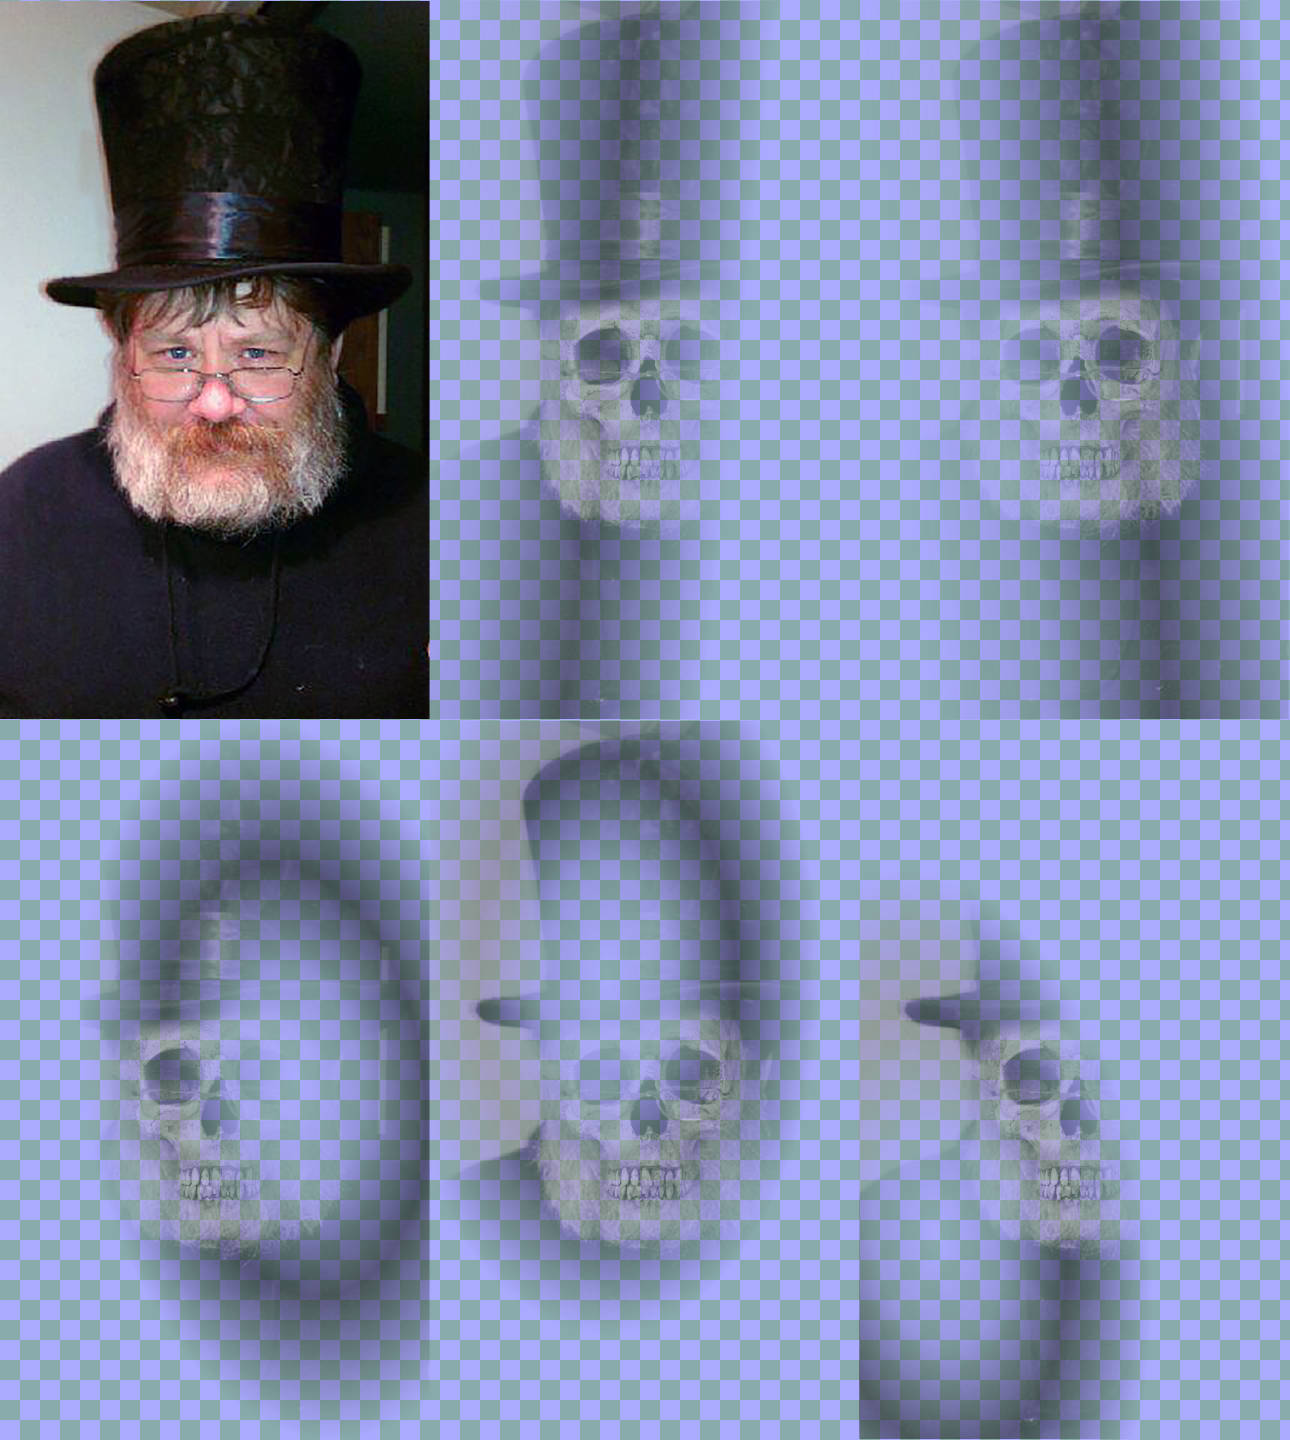 The base photograph of Kurt in a top hat, and then five different versions of the black-and-white skeleton image.  Each of the skeleton images is mostly transparent (with the checked background showing through).  The visible parts of each are in a different stripe or a ring shape, with faded gradient edges.